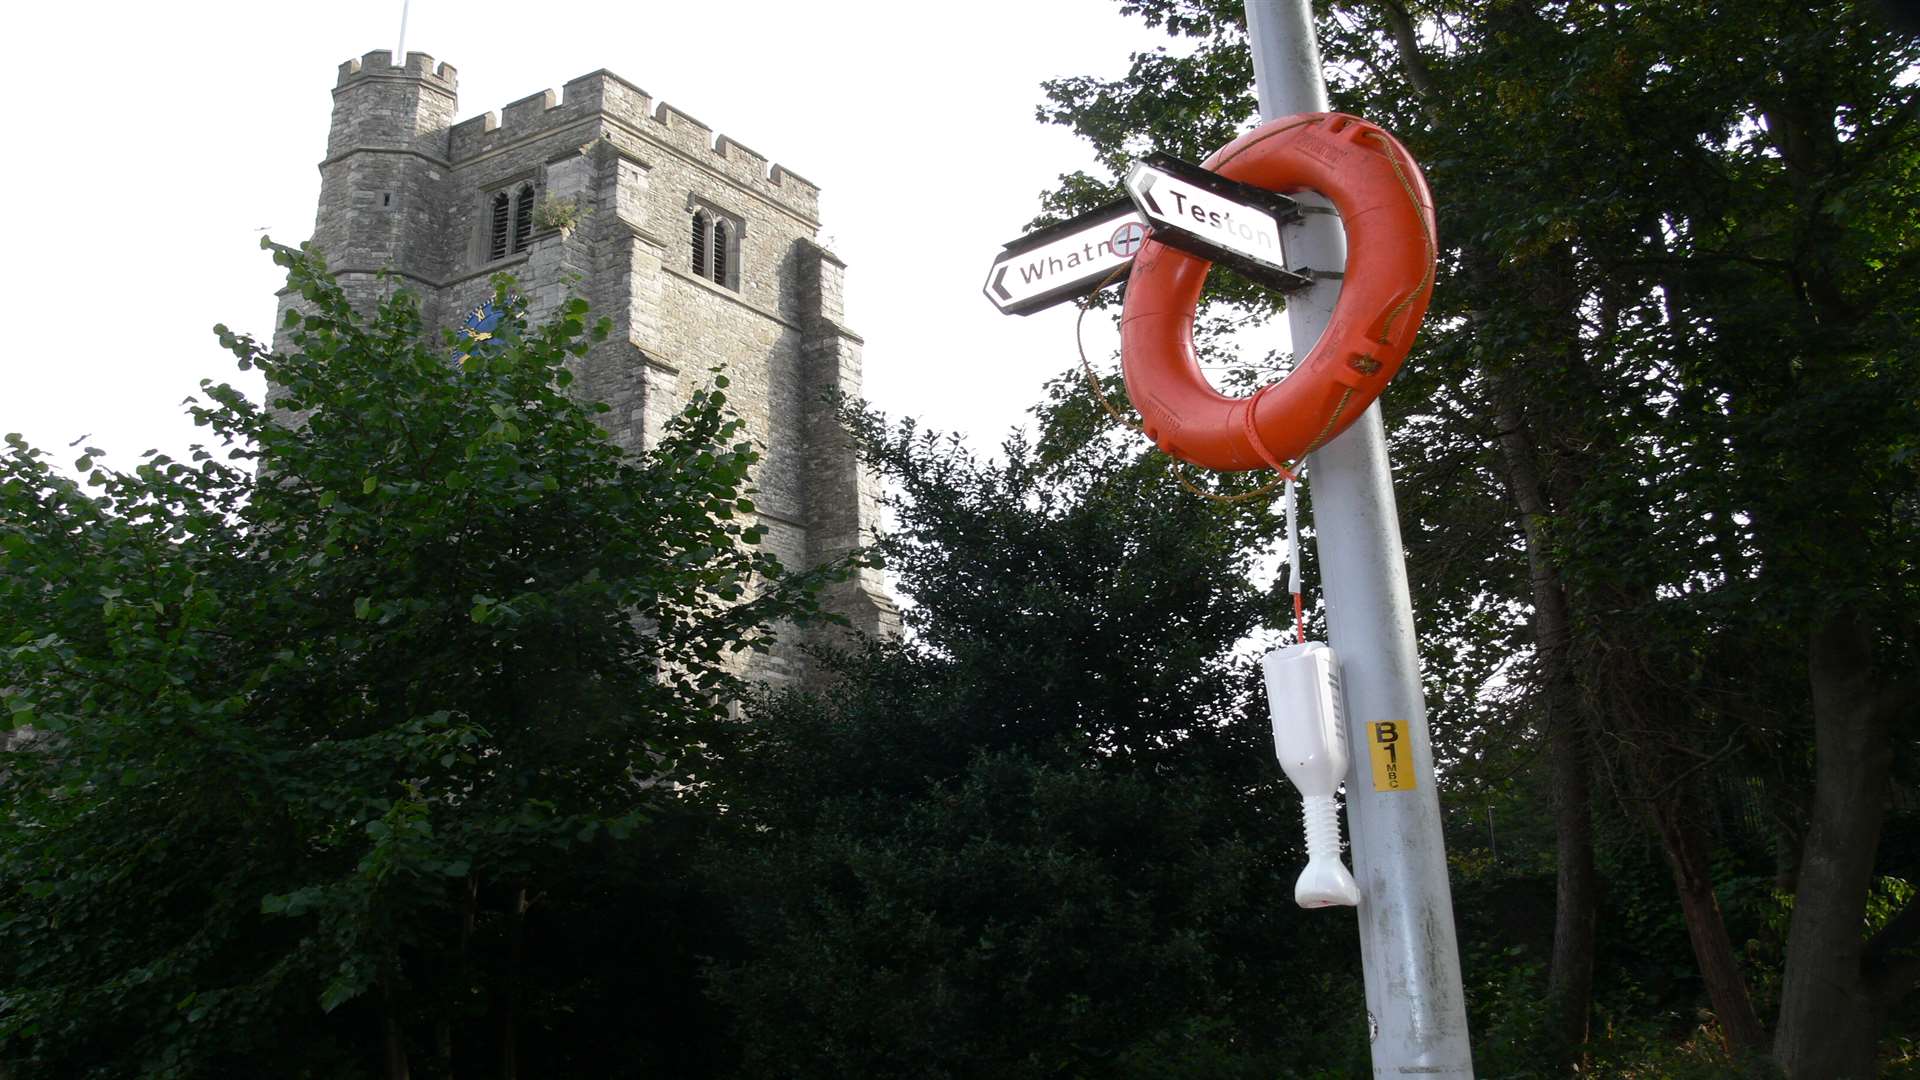 This life ring at one of the River Medway’s busiest sections, near All Saints' Church, was slung over a signpost. Picture: Maidstone Borough Council